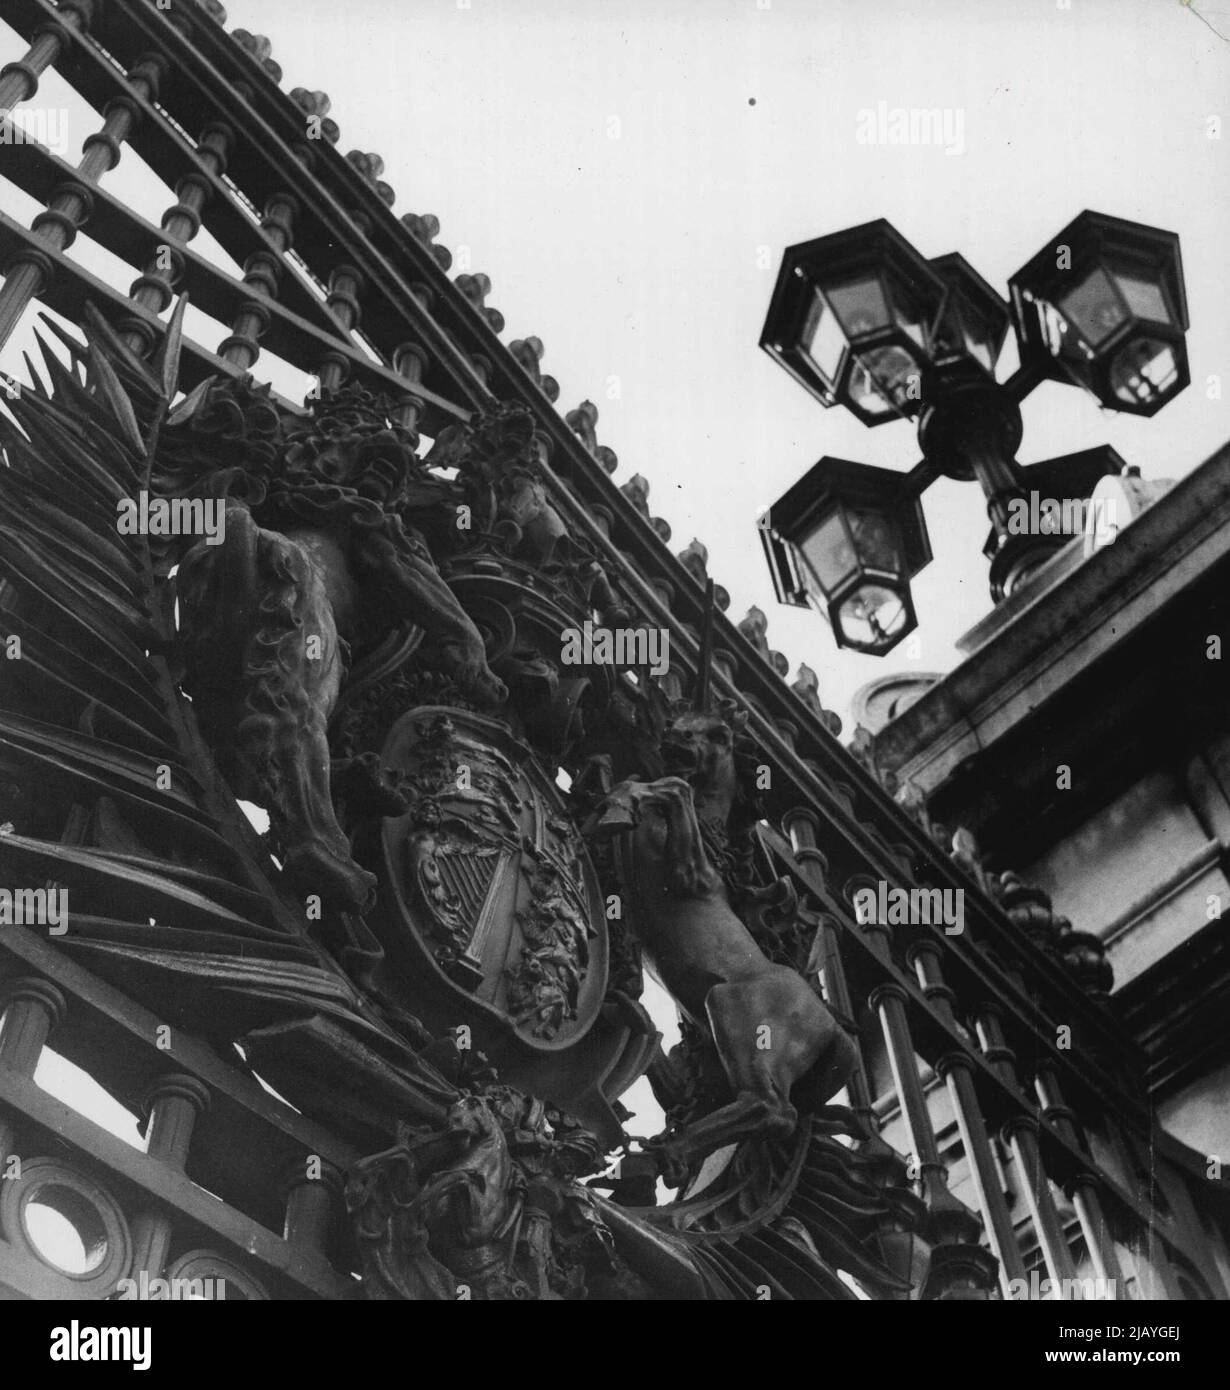 Round And About Buckingham Palace - Royal crest on gates and one of the 'bunch-of-grapes' clusters of lanterns. January 11, 1949. (Photo by Camera Press). Stock Photo